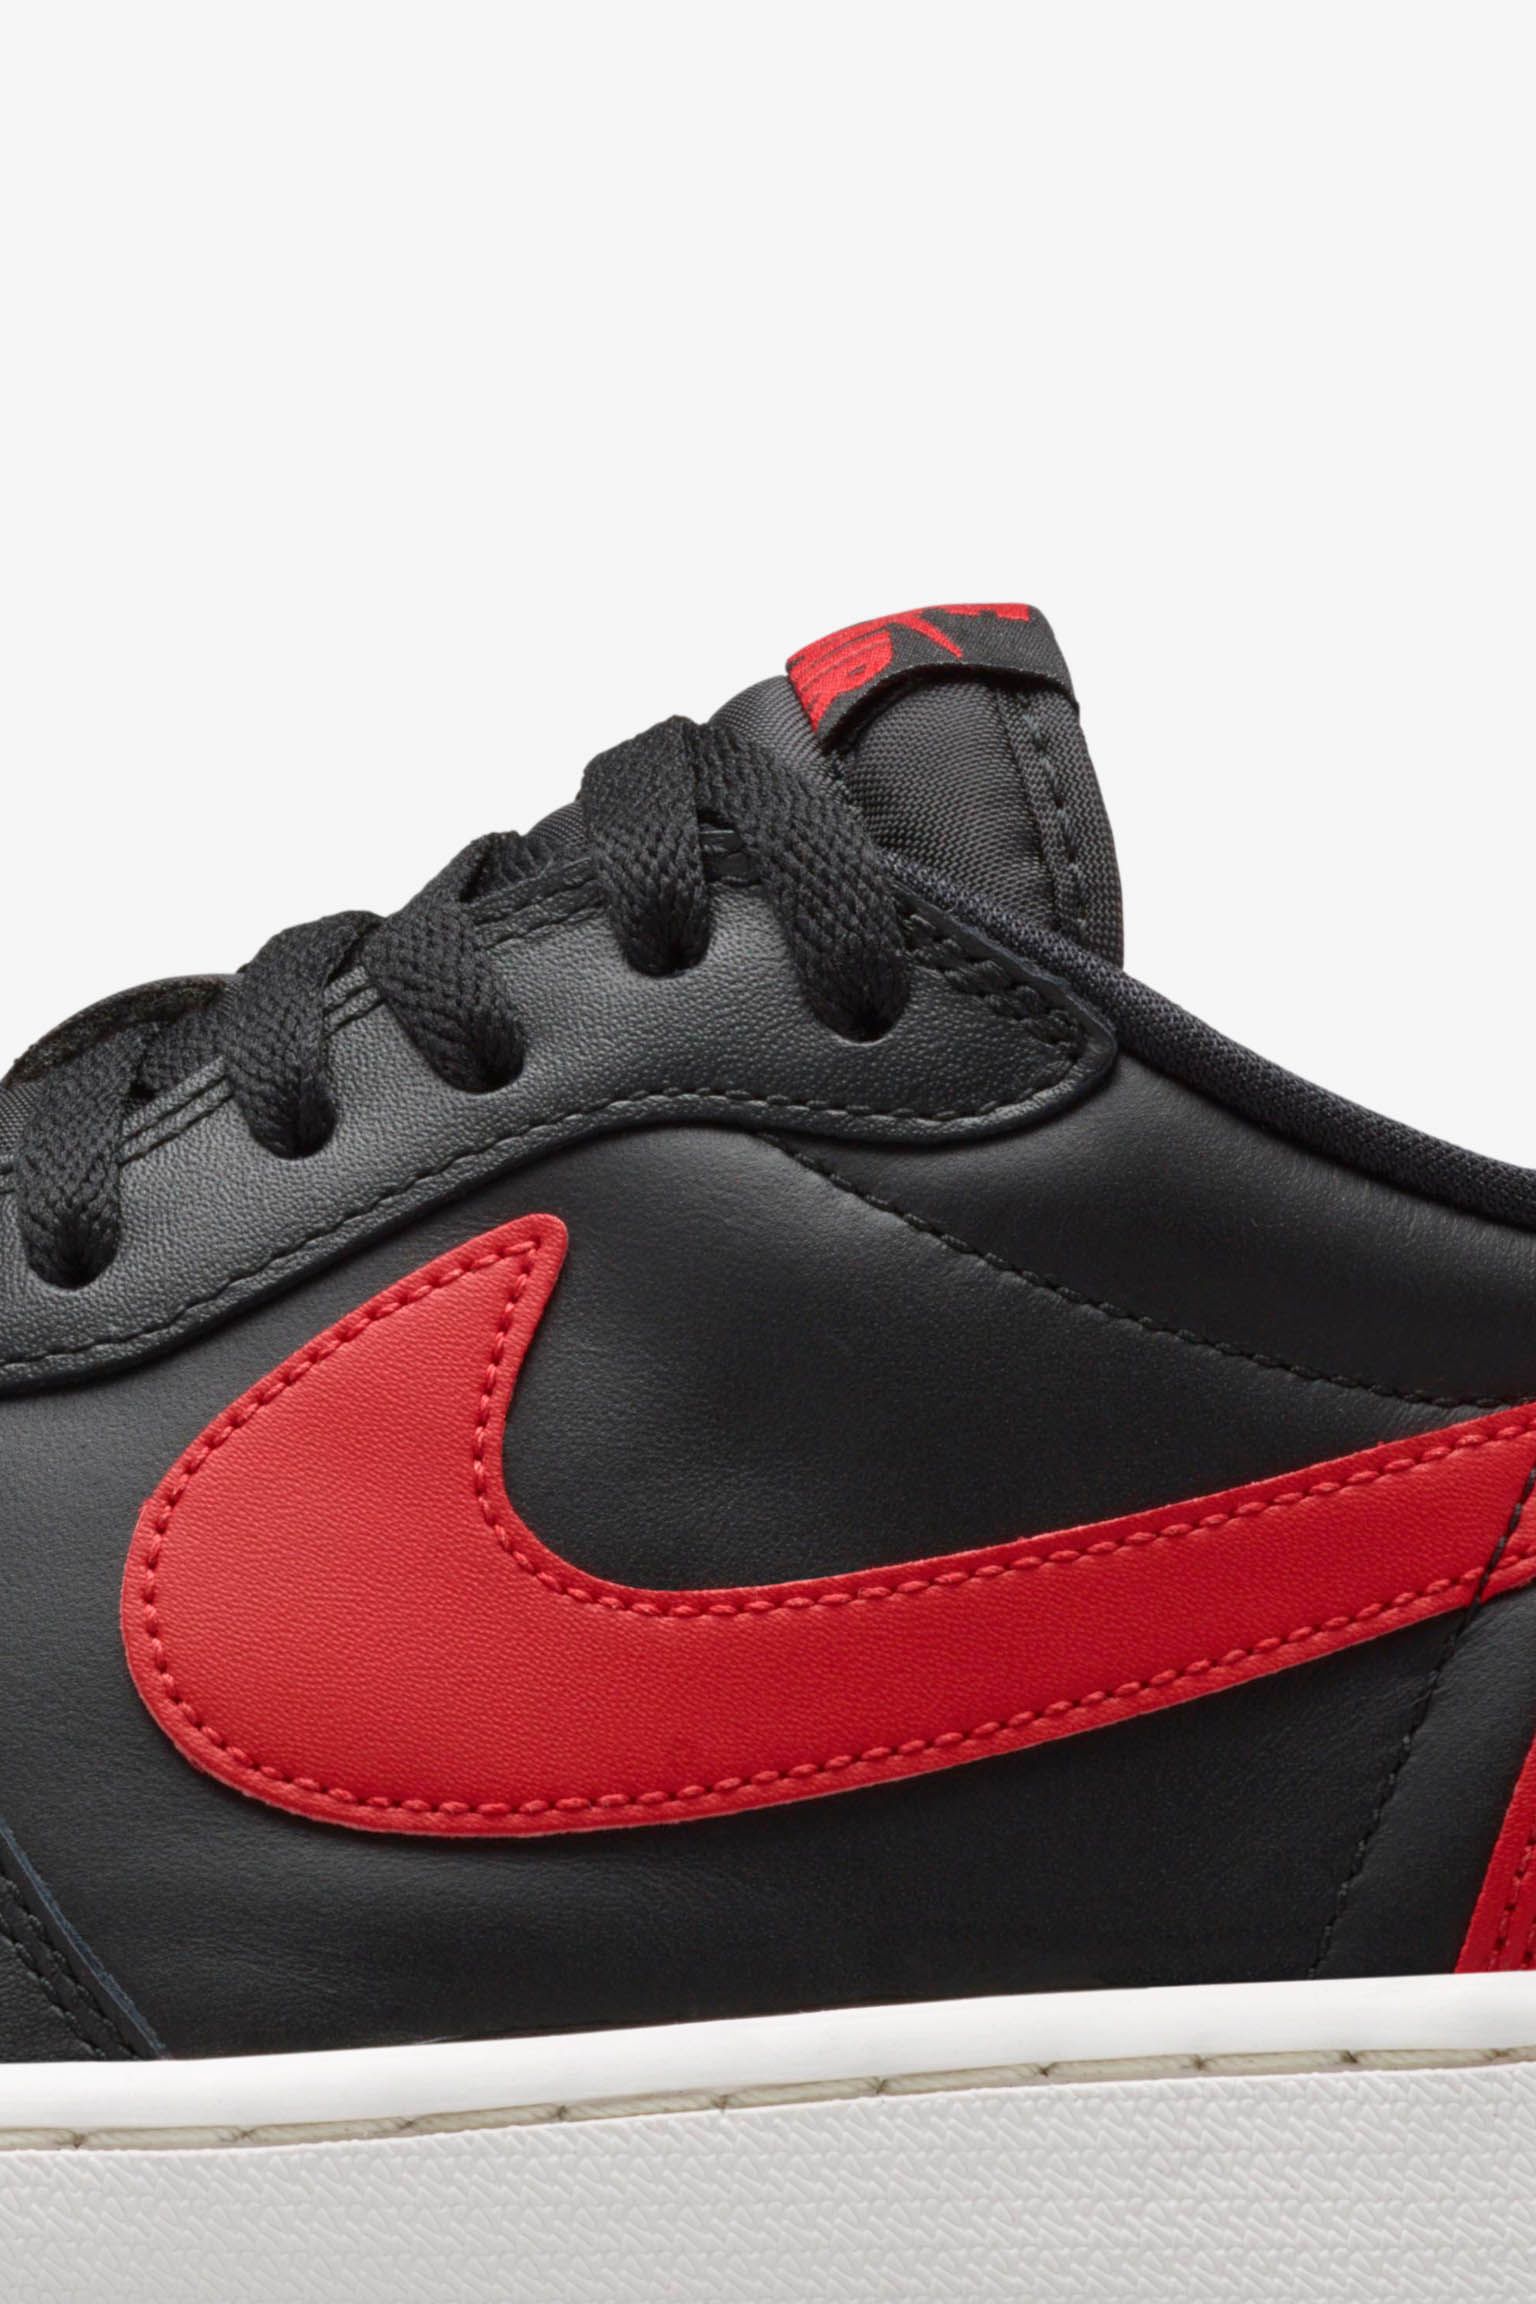 Air Retro Low & Varsity Red' Release Date. Nike SNKRS